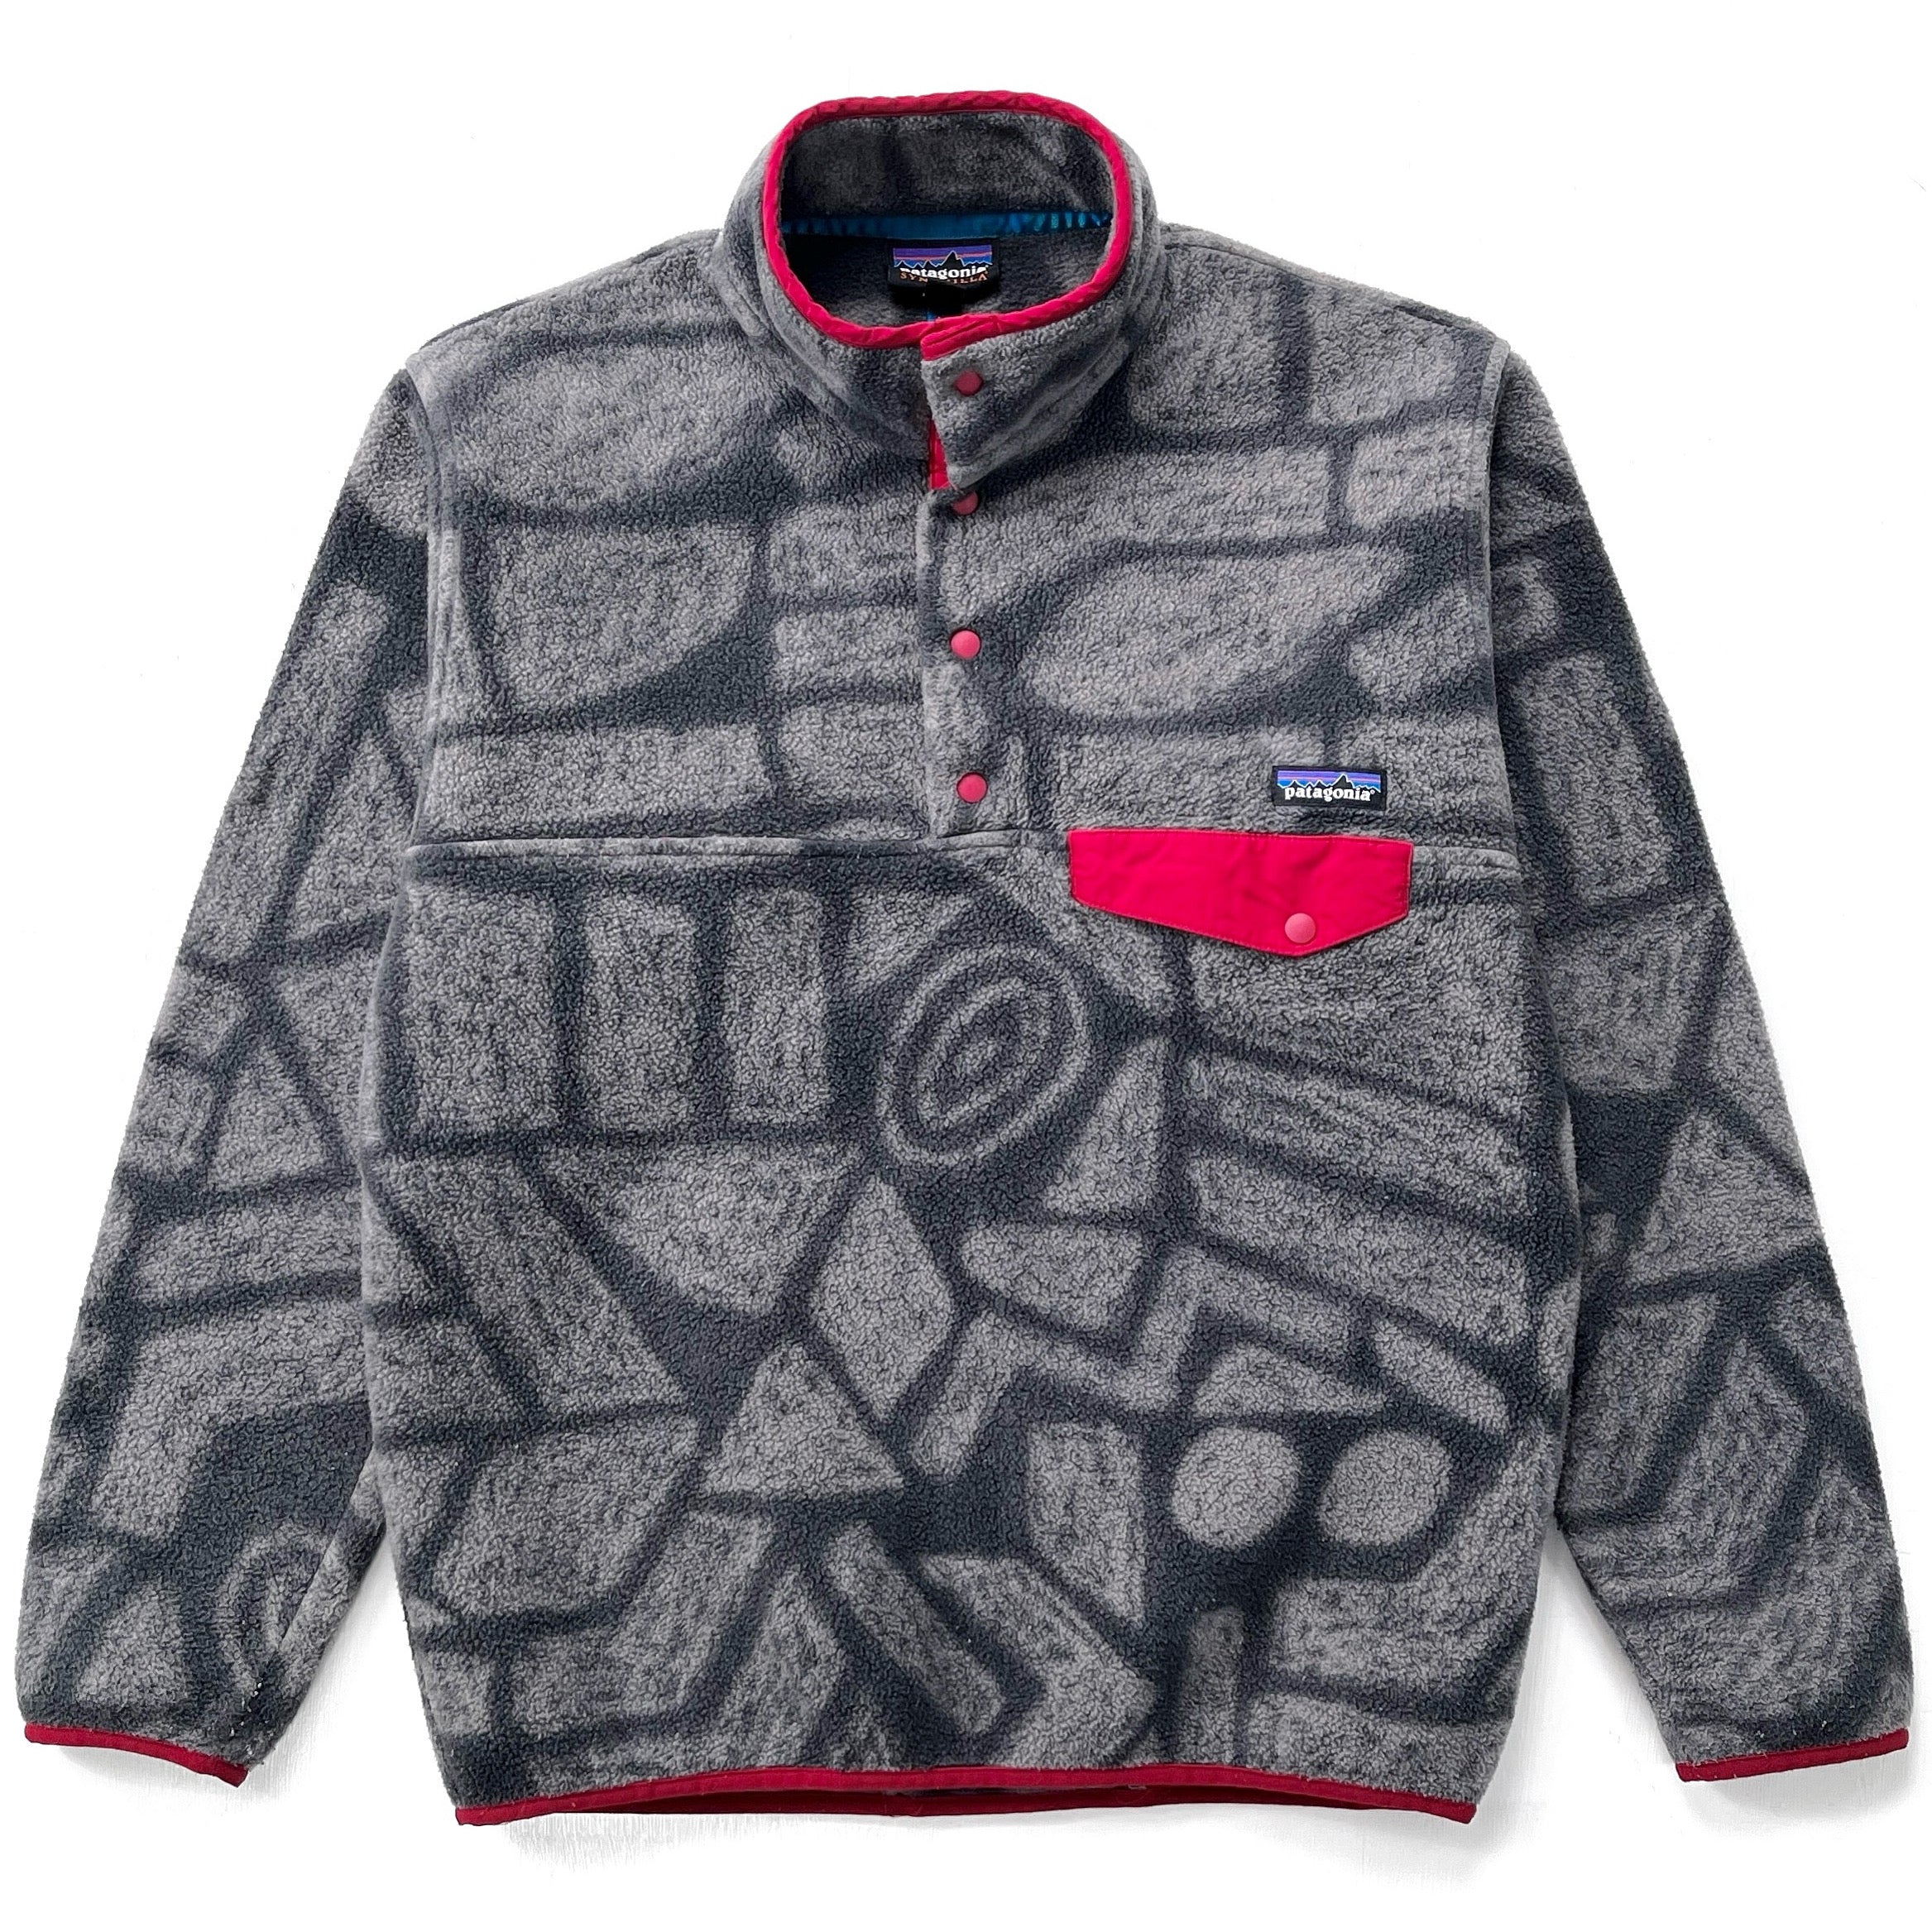 2015 Patagonia Printed Synchilla Snap-T, Shale: Forge Grey (M)